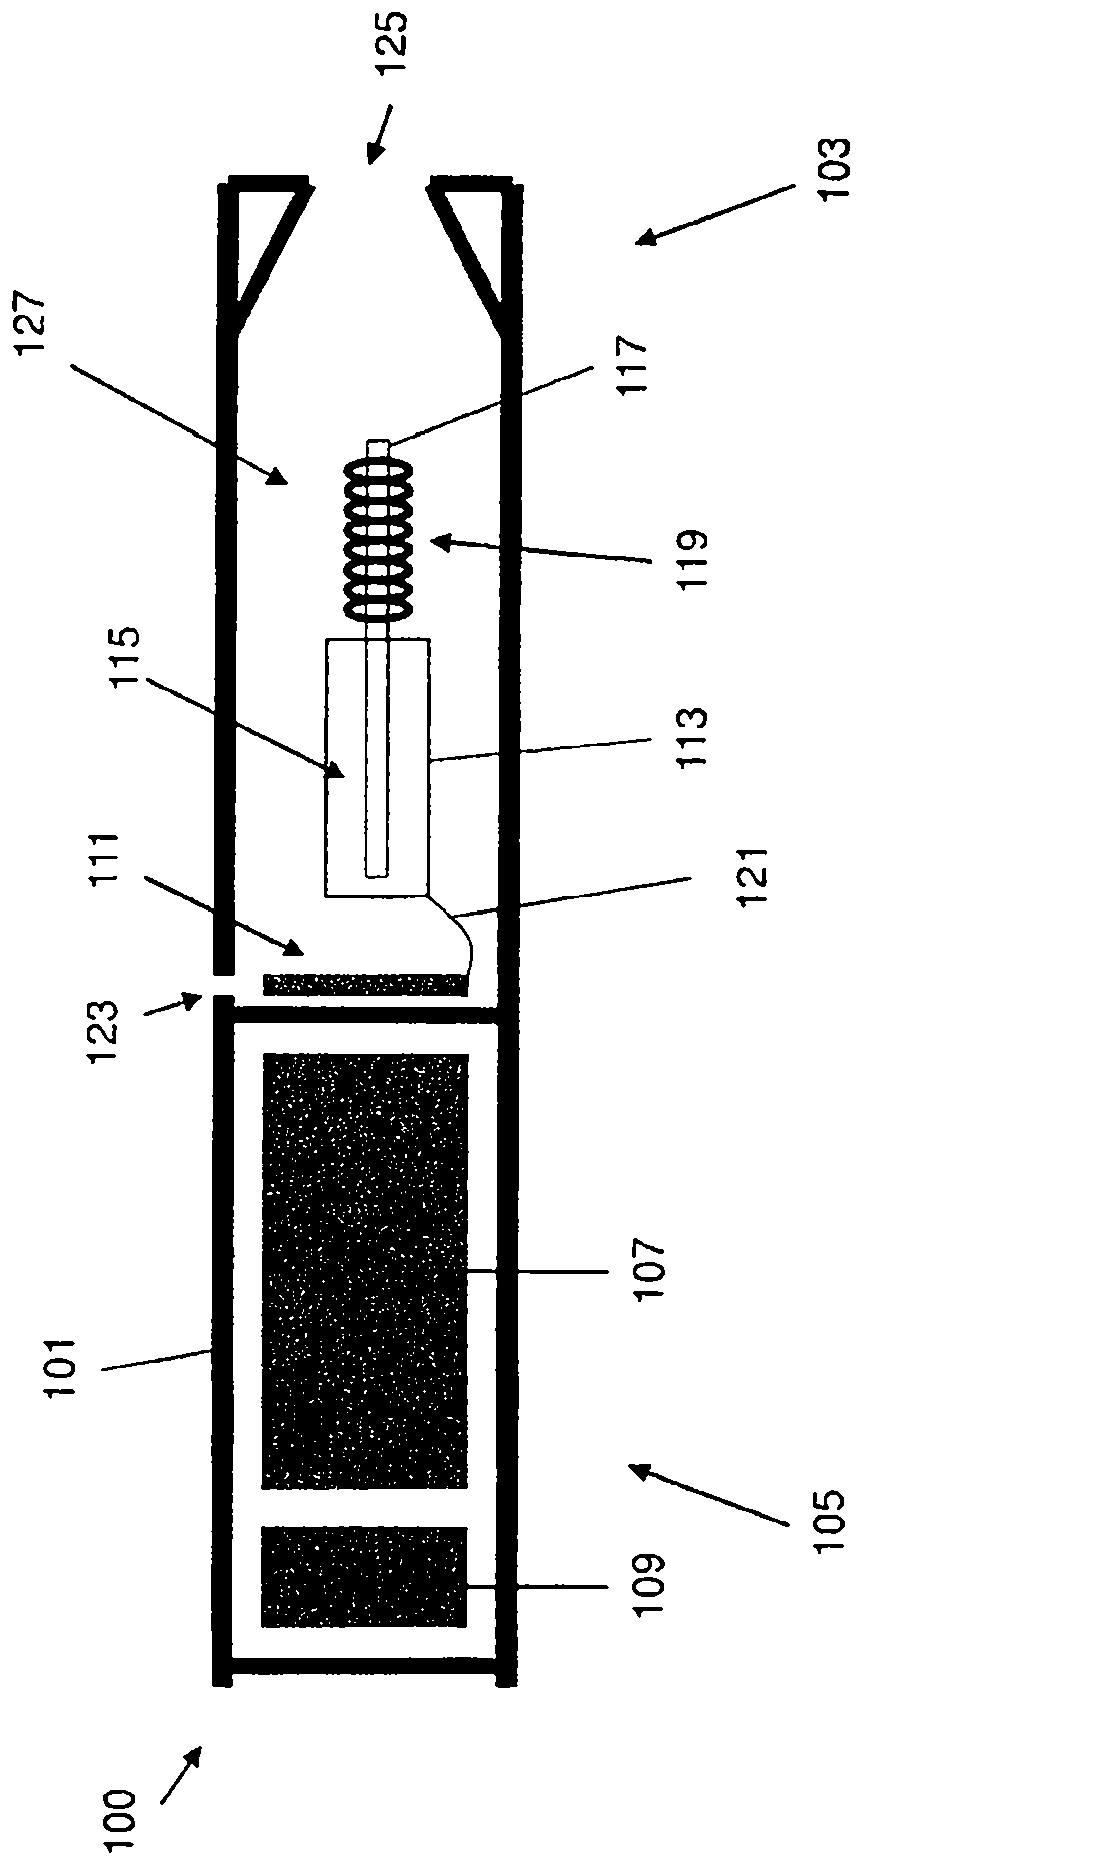 An aerosol generating system having means for determining depletion of a liquid substrate